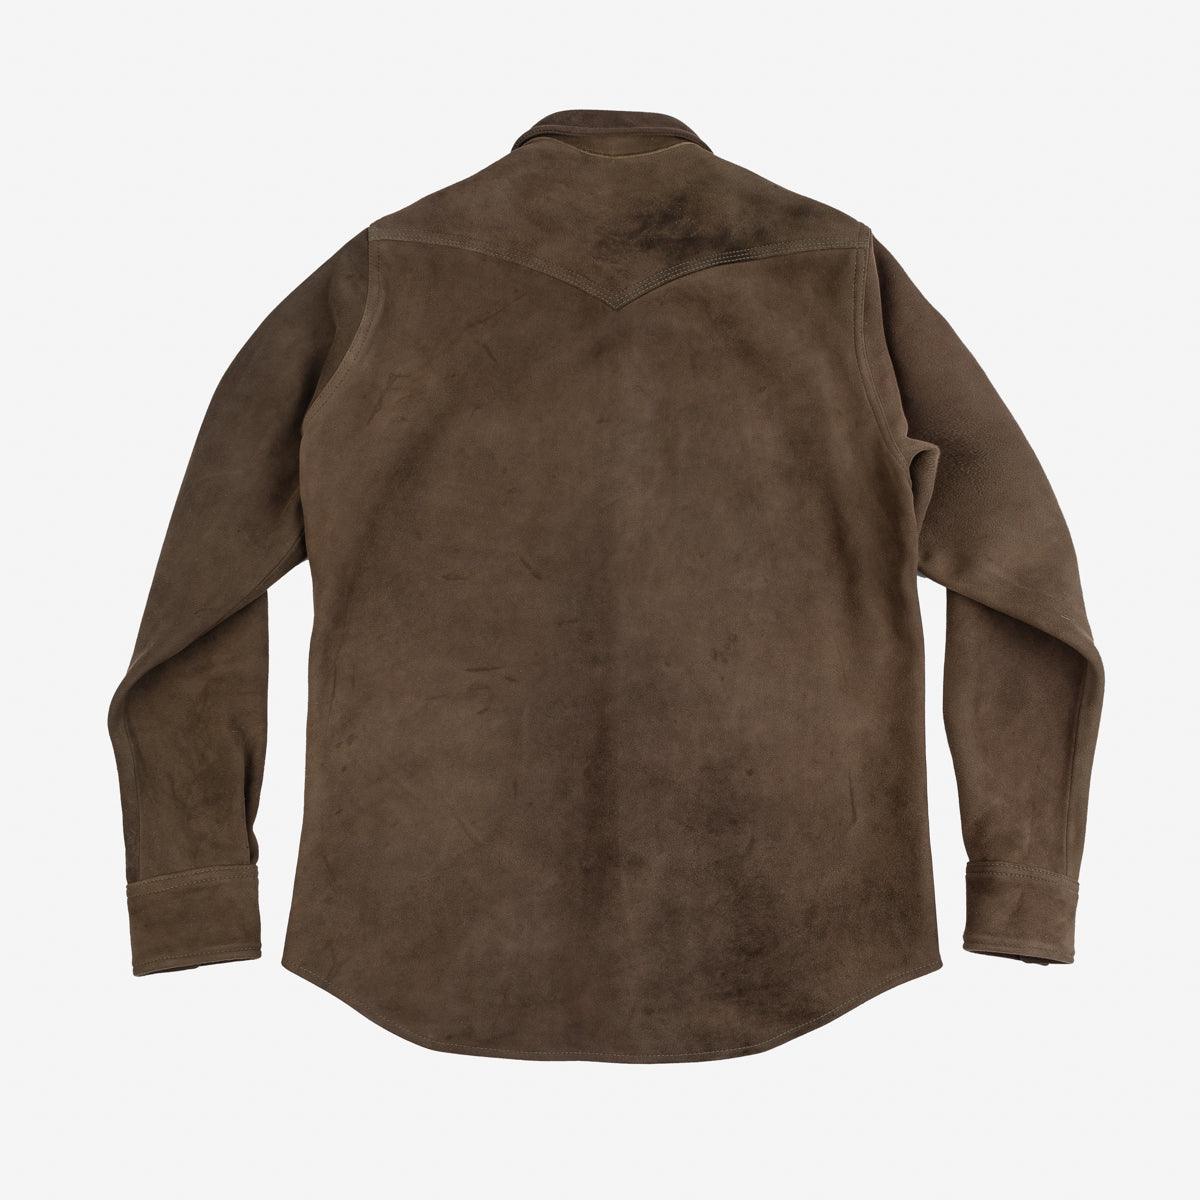 Image showing the IHSB-BIGBUCK-OLV - Deerskin Western Shirt 'The Big Buck' - Olive which is a Shirts described by the following info Iron Heart, Released, Shirts, Tops and sold on the IRON HEART GERMANY online store